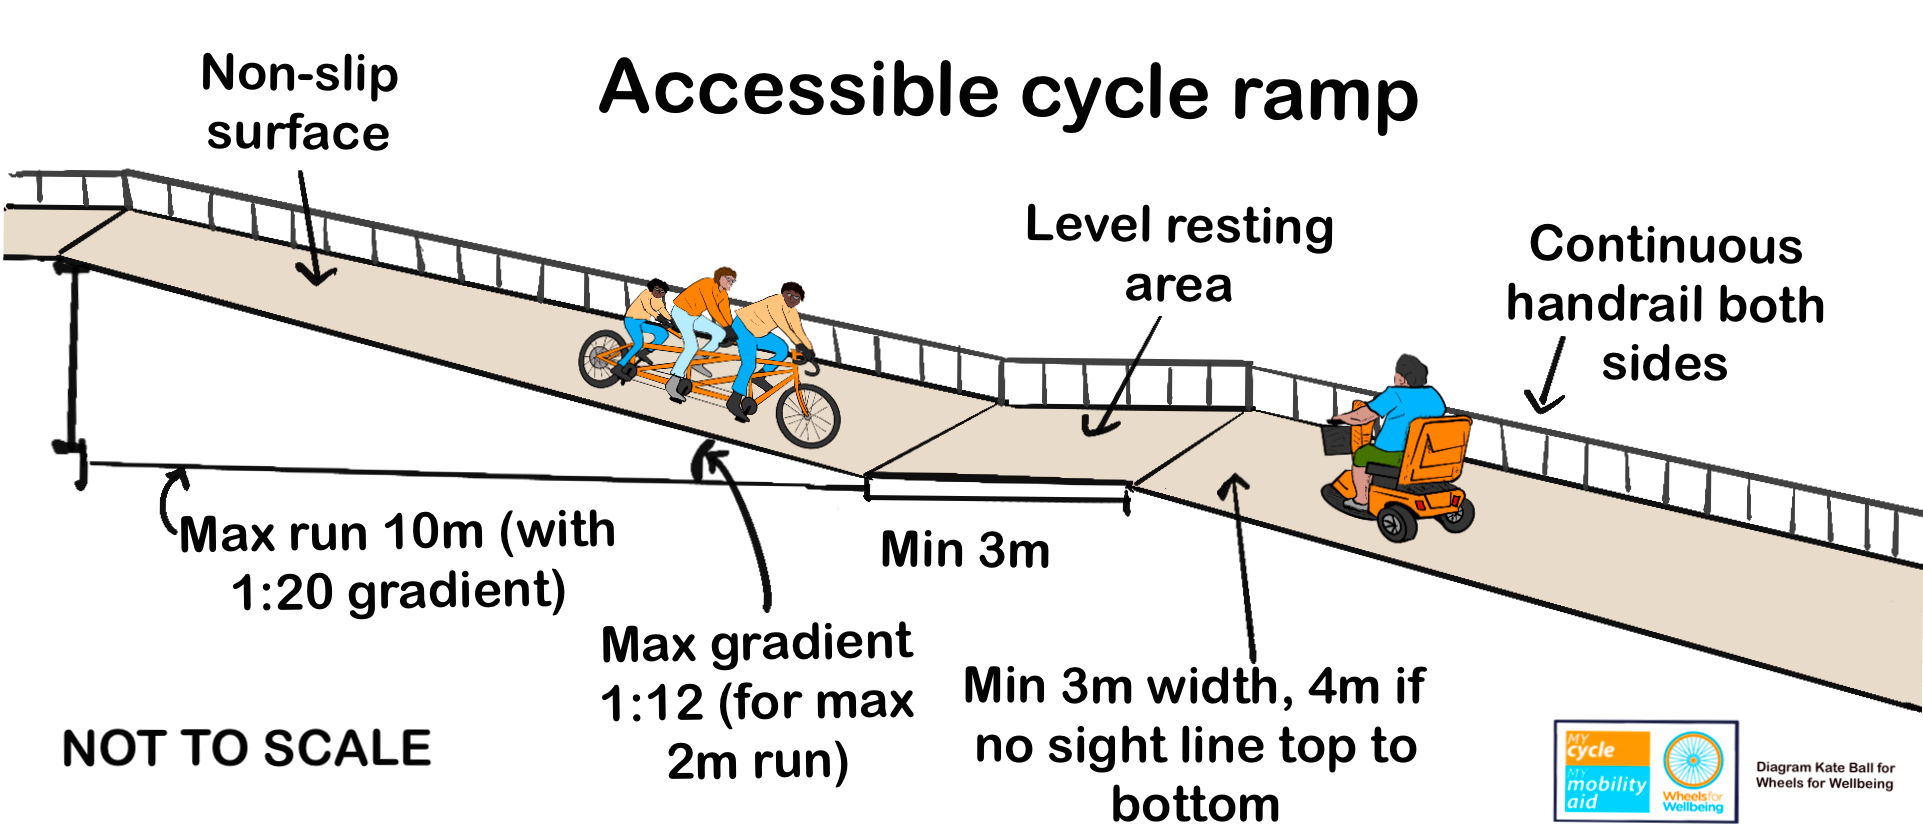 Graphic titled "accessible cycle ramp" shows a buff coloured 2-stage ramp with level resting areas. A mobility scooter user is going up and a triplet cycle coming down. Labels read: Non-slip surface, level resting area, continuous handrail both sides, min 3m width, 4m if no sight line top to bottom, min 3m depth for resting area, max gradient 1:12 for max 2m run, max run 10 with 1:20 gradient. The Wheels for Wellbeing logo, My Cycle My Mobility Aid logo and text "diagram Kate Ball for Wheels for Wellbeing" are in the bottom right corner.